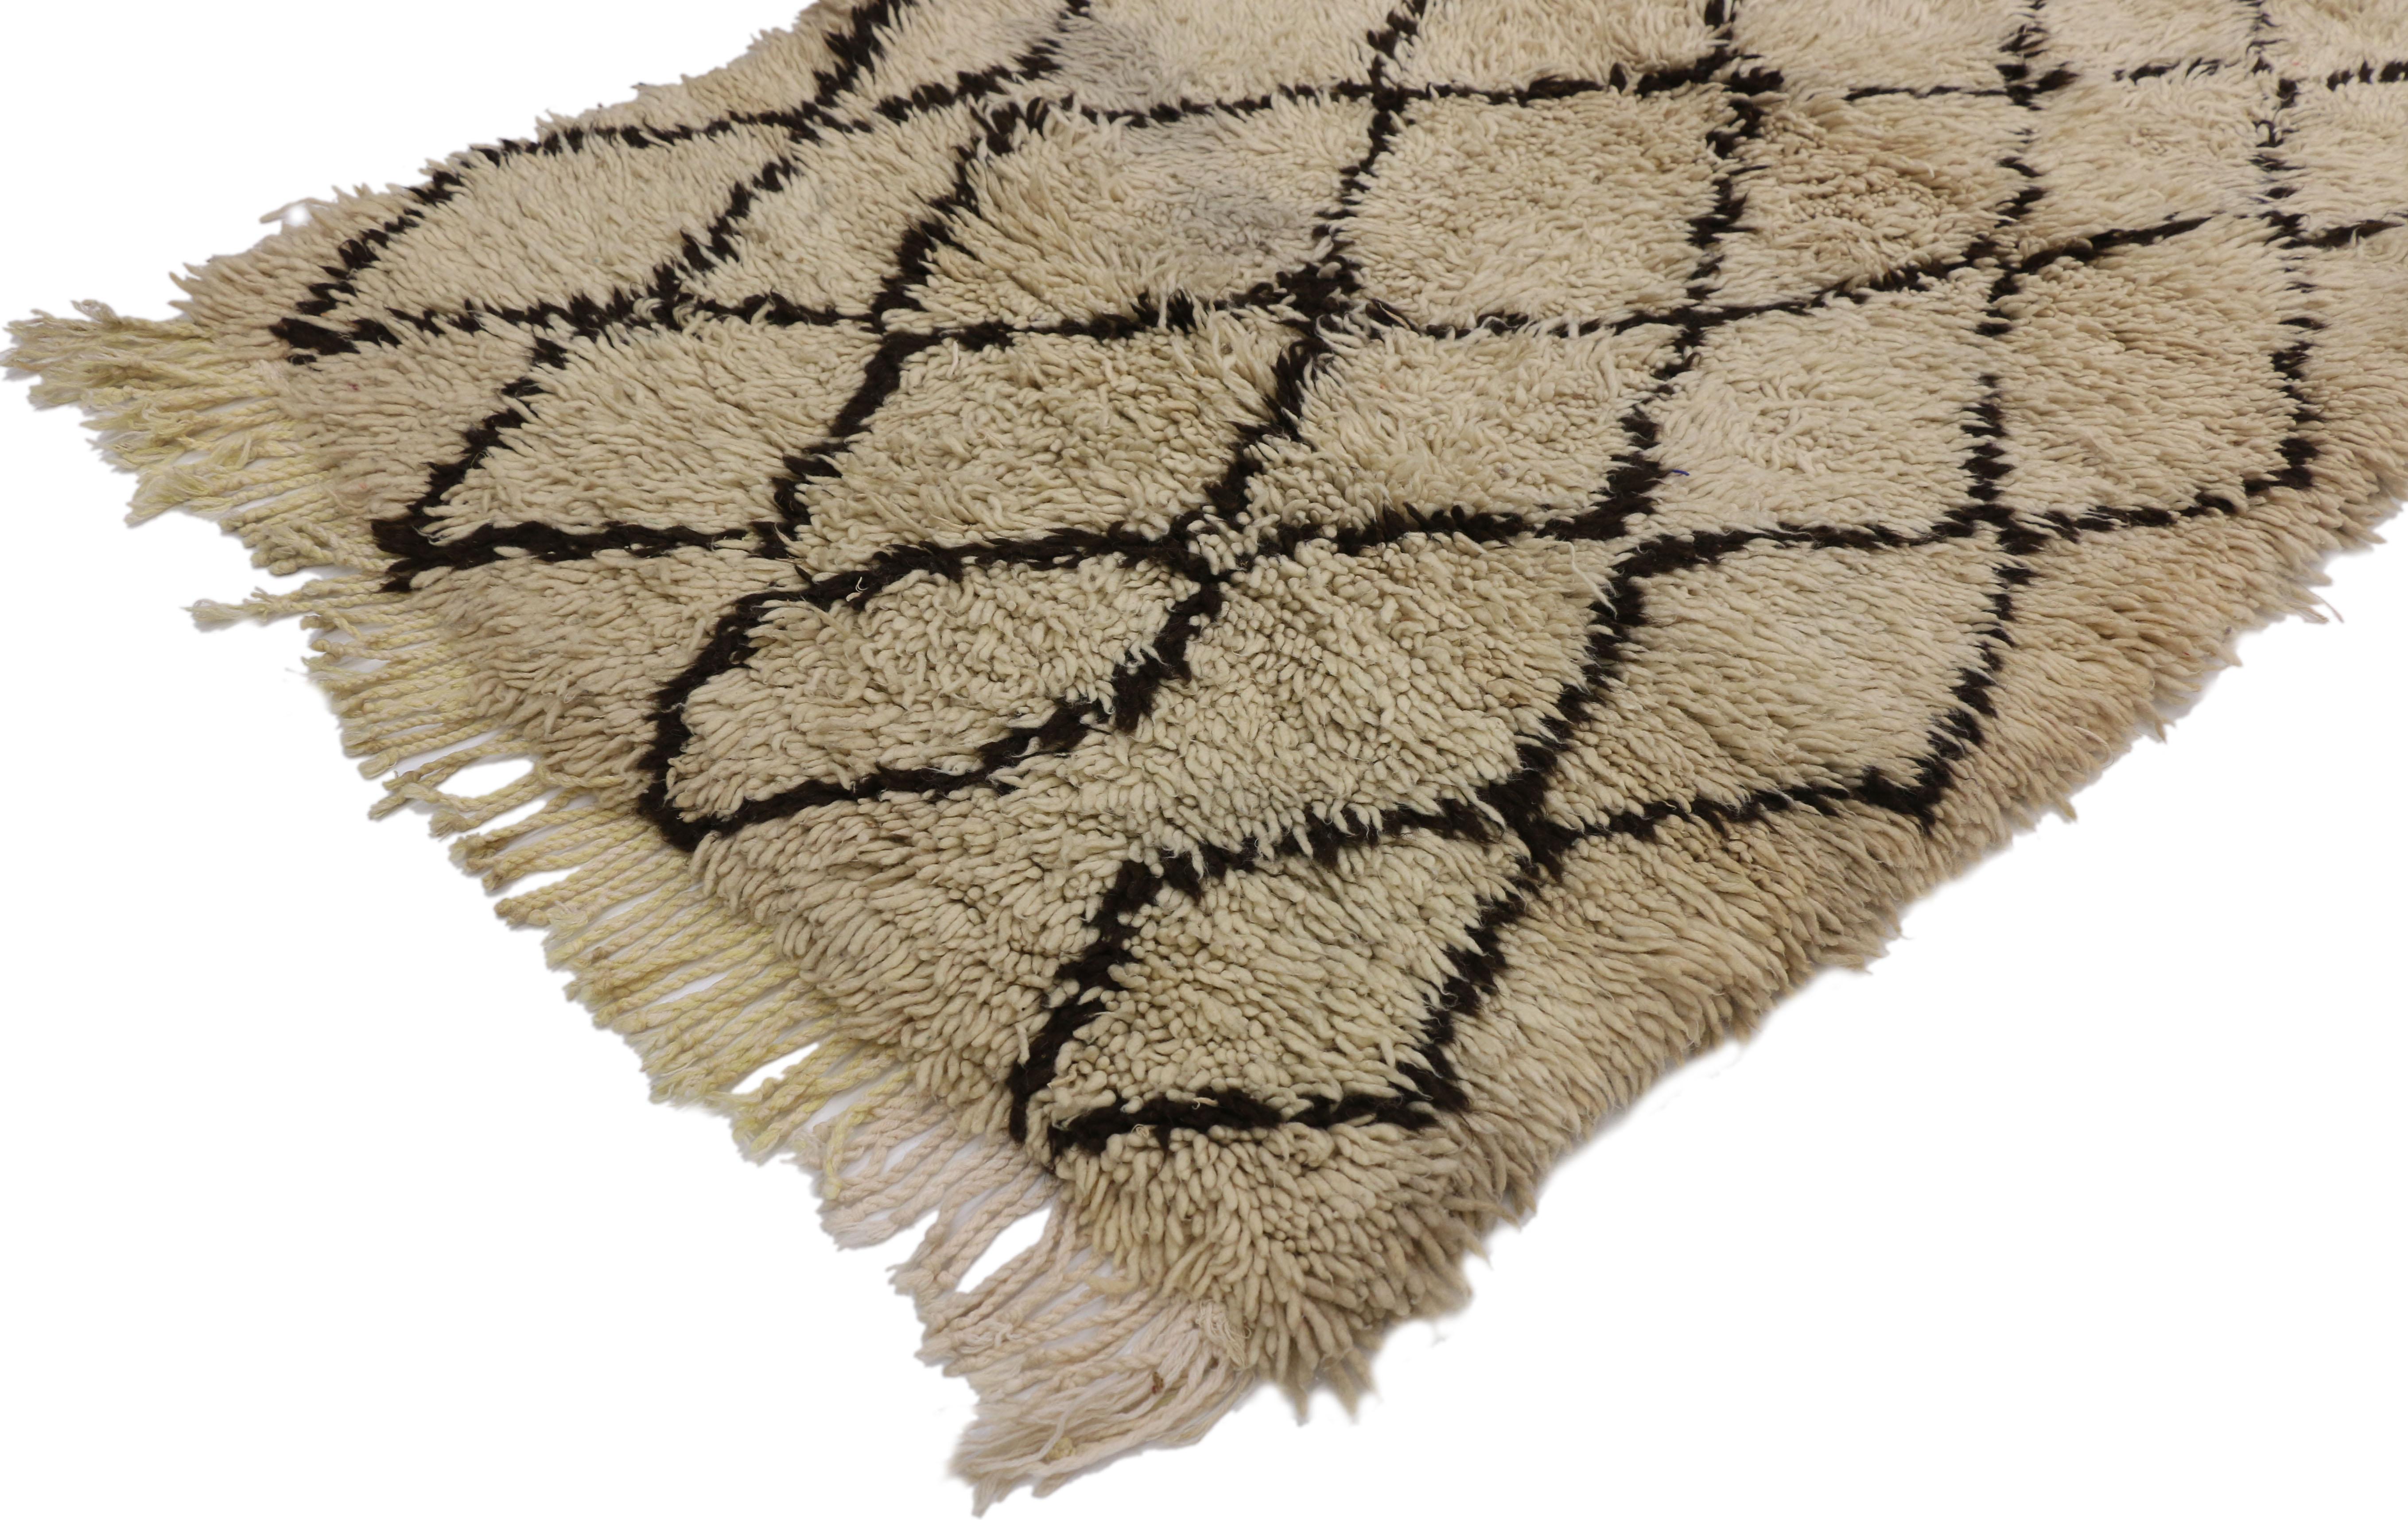 20835 vintage Moroccan rug with Modern style, Berber Moroccan rug. This hand knotted wool vintage Moroccan rug features seven columns of diamond lattices unfolding across the middle of an abrashed cream field. The zigzag outlines come together to